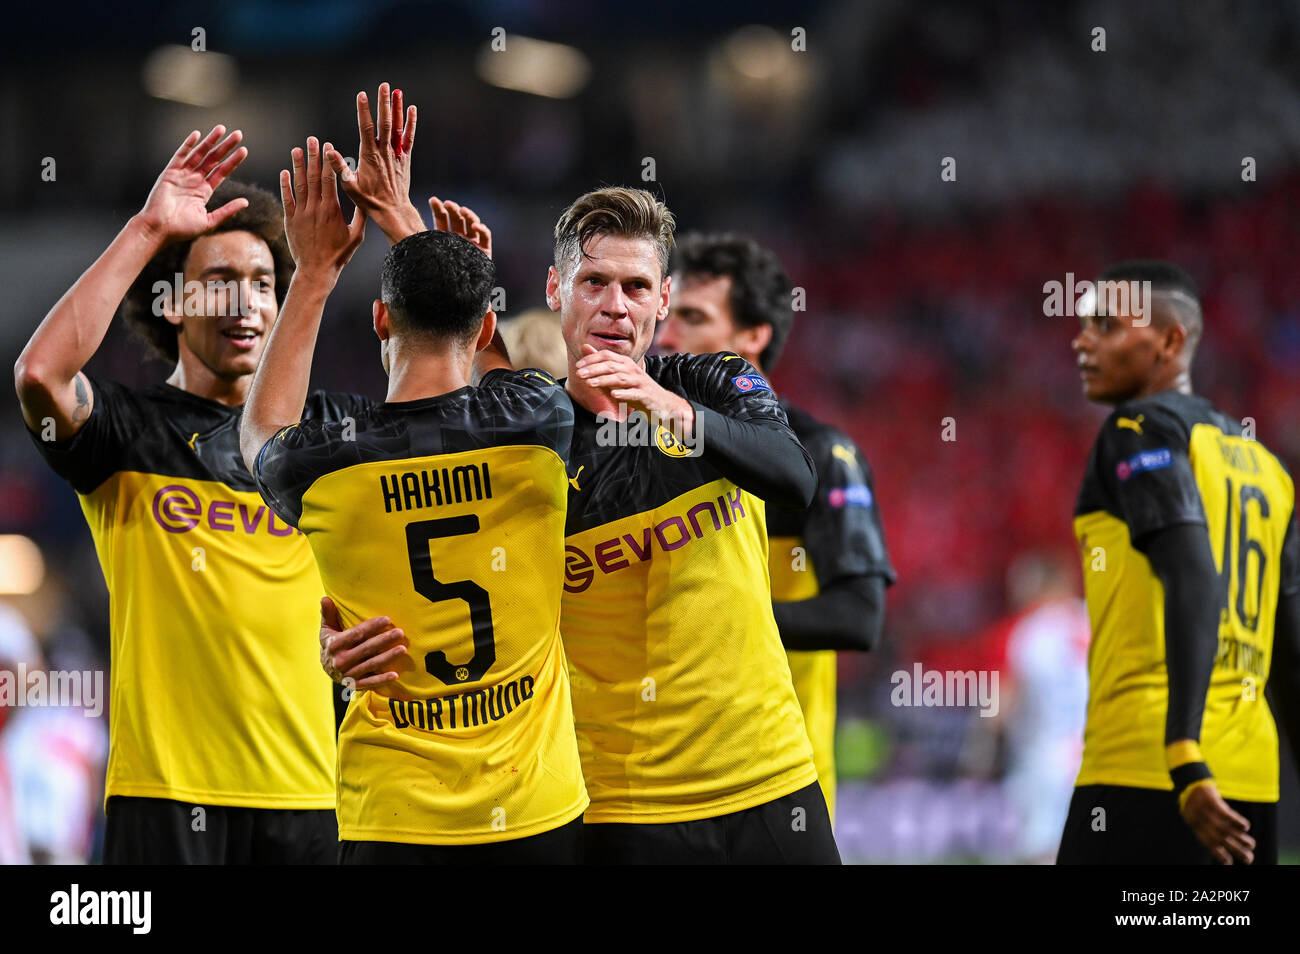 Borussia Dortmund players celebrate during the UEFA Champions League (Group F) match between Slavia Prague and Borussia Dortmund in Prague.(Final score; Slavia Prague 0:2 Borussia Dortmund) Stock Photo